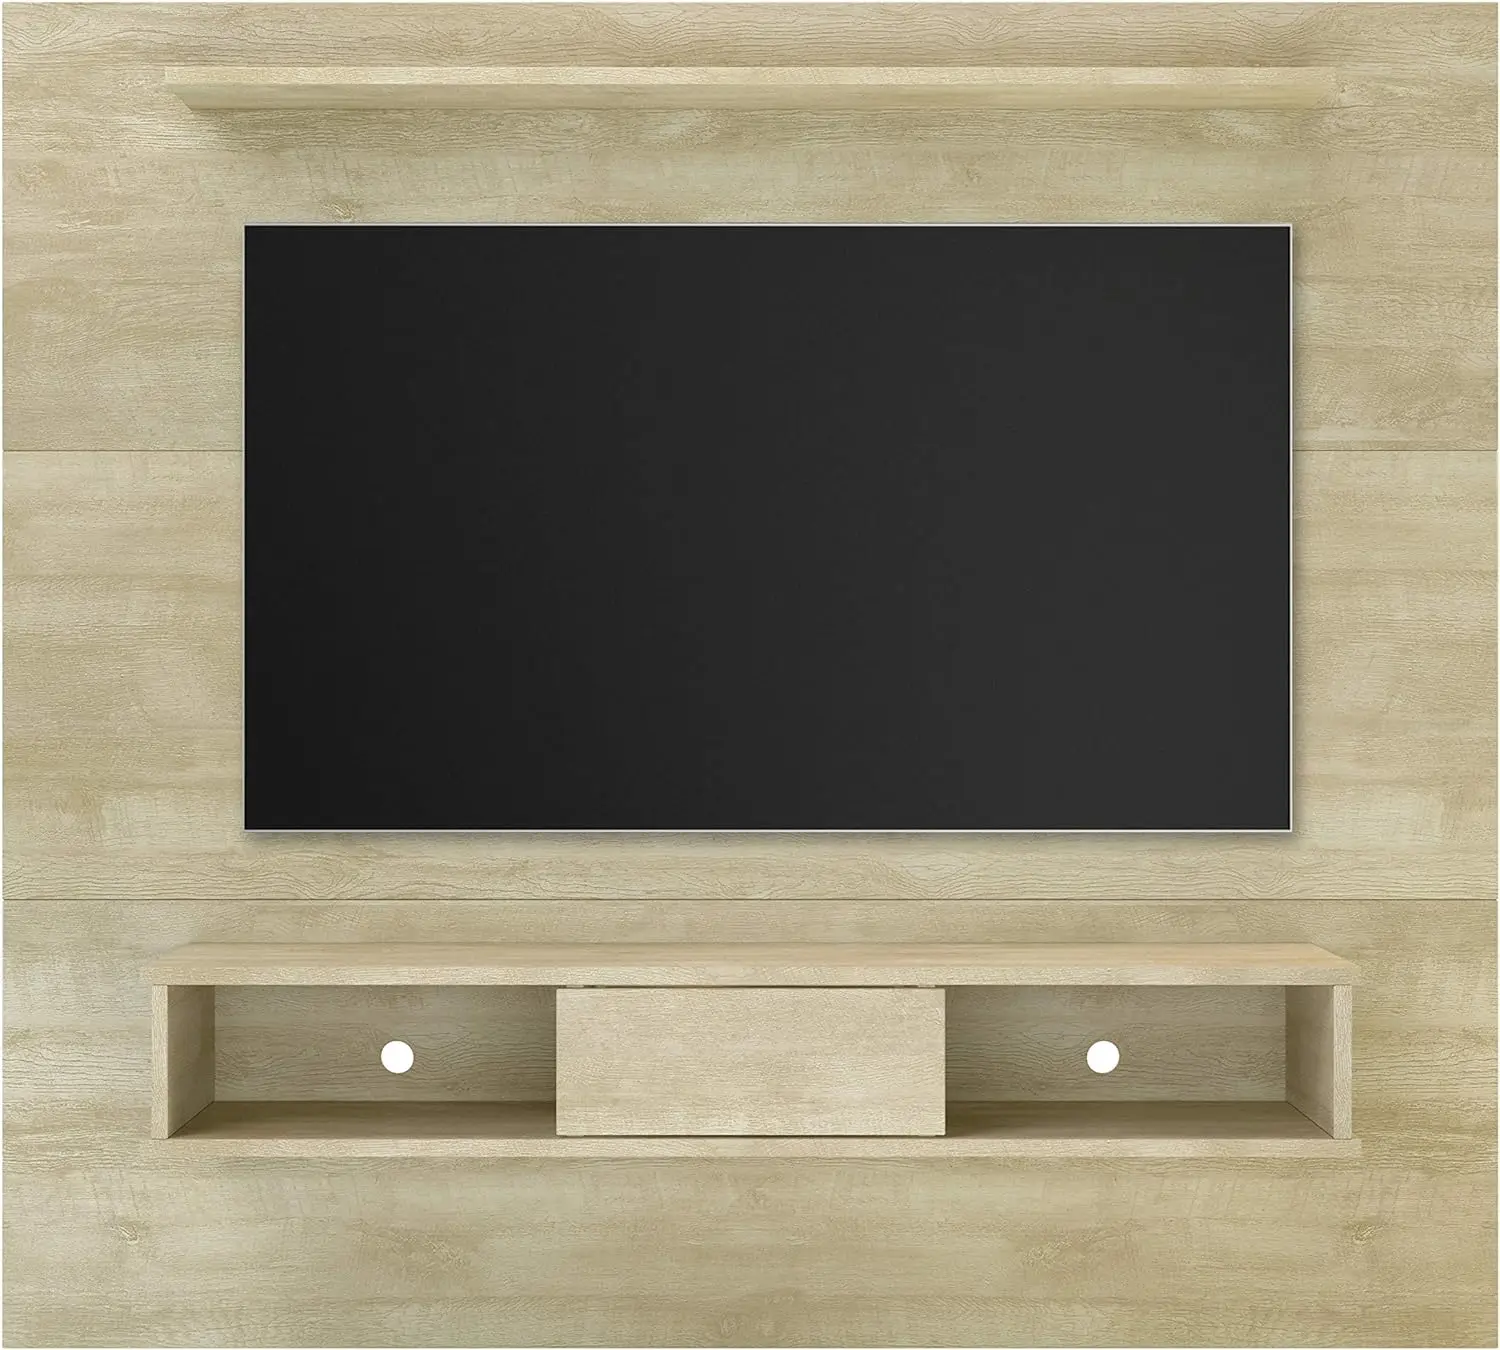 

65 inch 2-Shelf, 70-inch Board for Flat Screens, Mid Century Modern Floating Entertainment Center, TV & Media Furniture